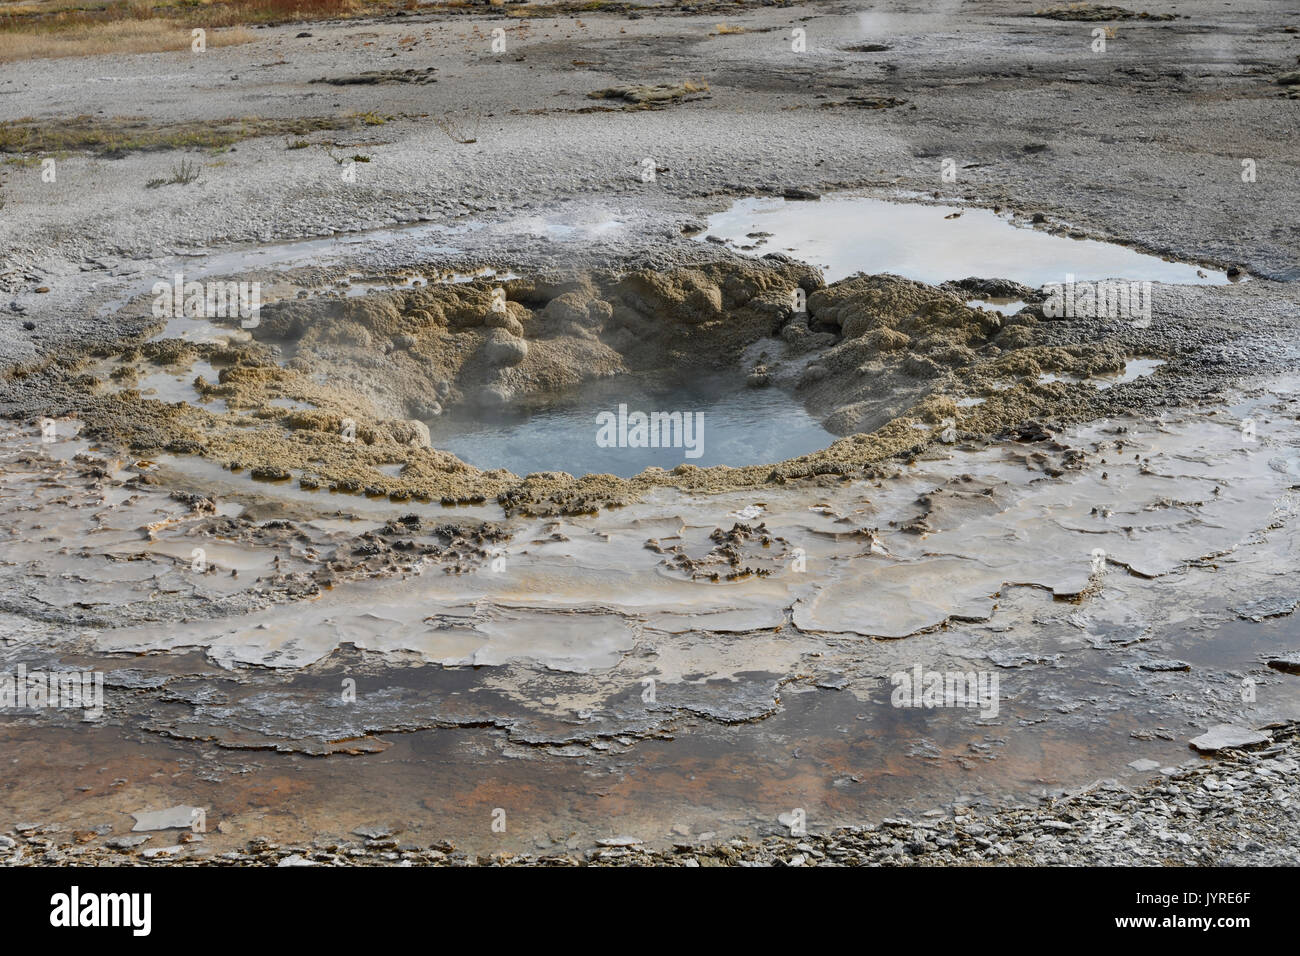 Les geysers de Yellowstone Banque D'Images